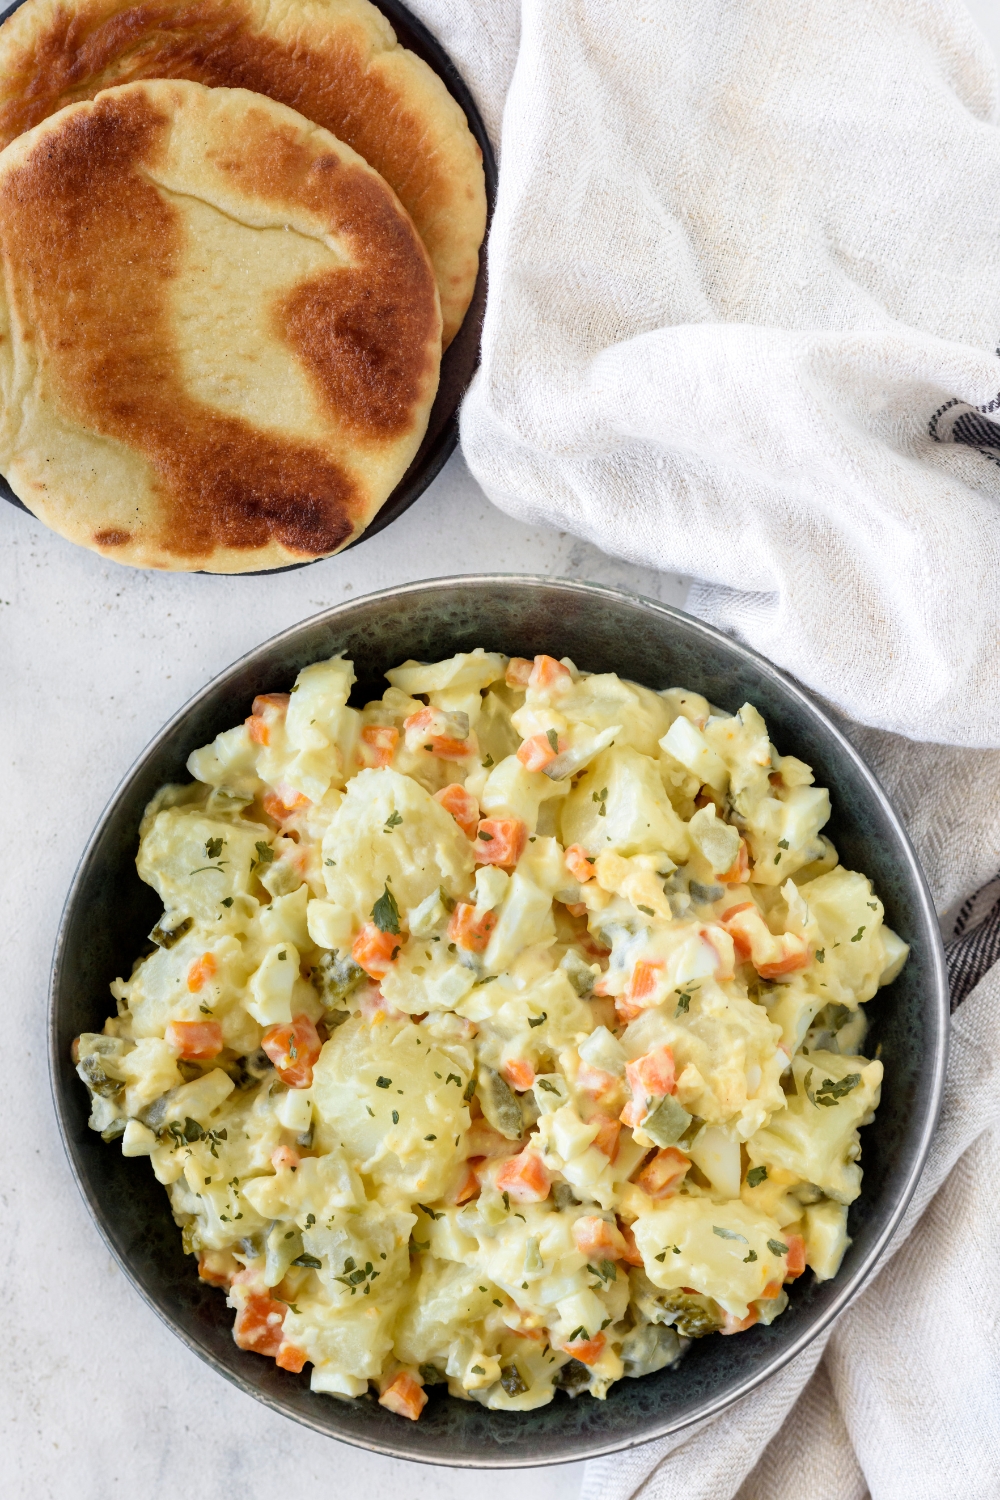 A bowl of potato salad with chunks of carrot and pickles. Next to the bowl is a stack of two pita bread.